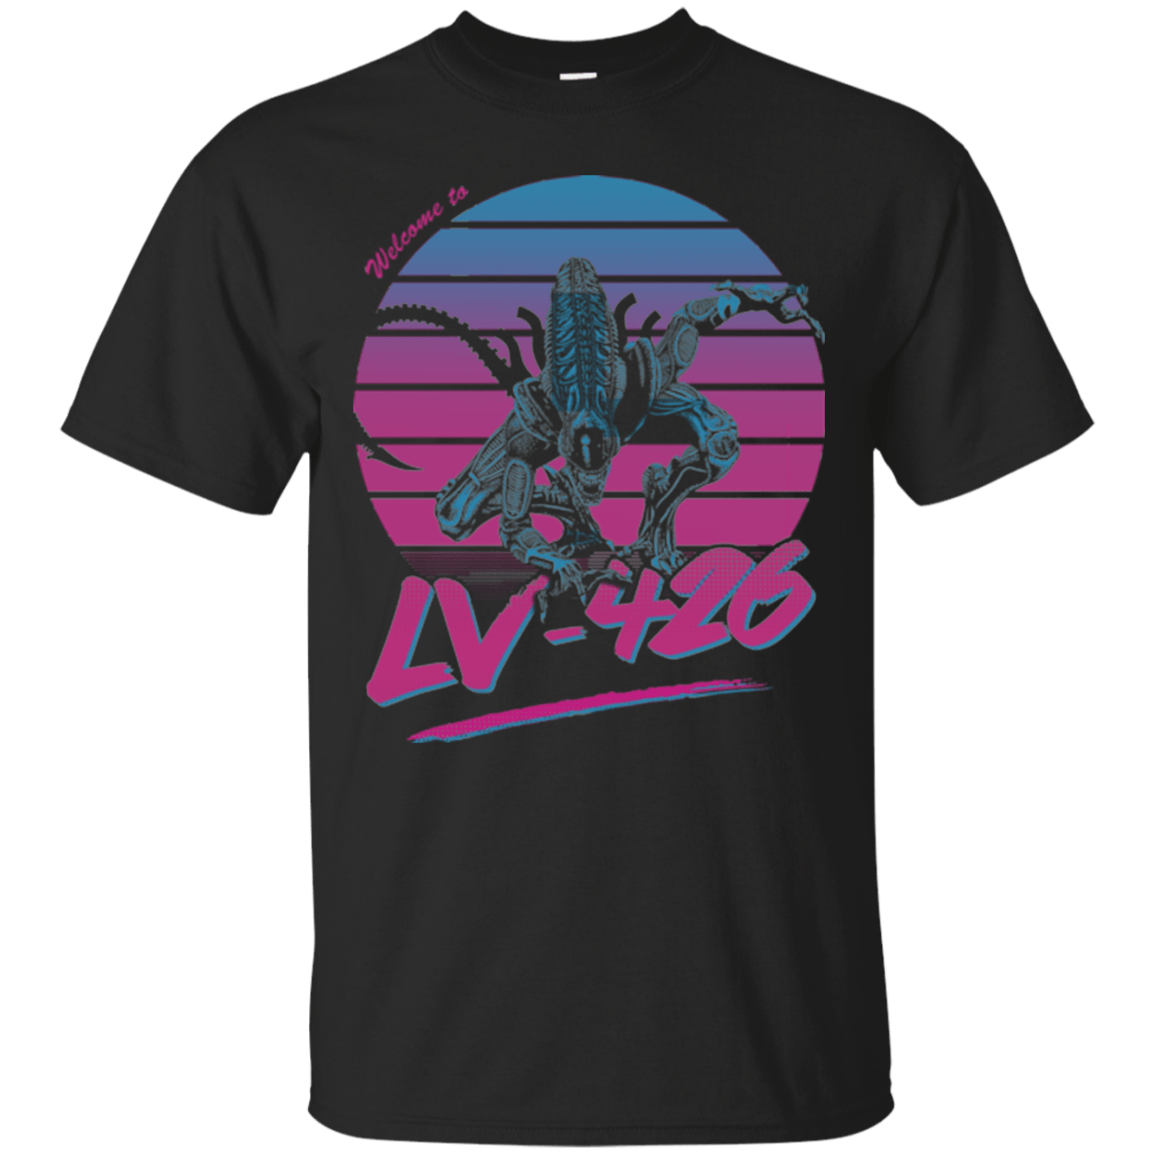 T-Shirts Black / Small Welcome to LV-426 T-Shirt